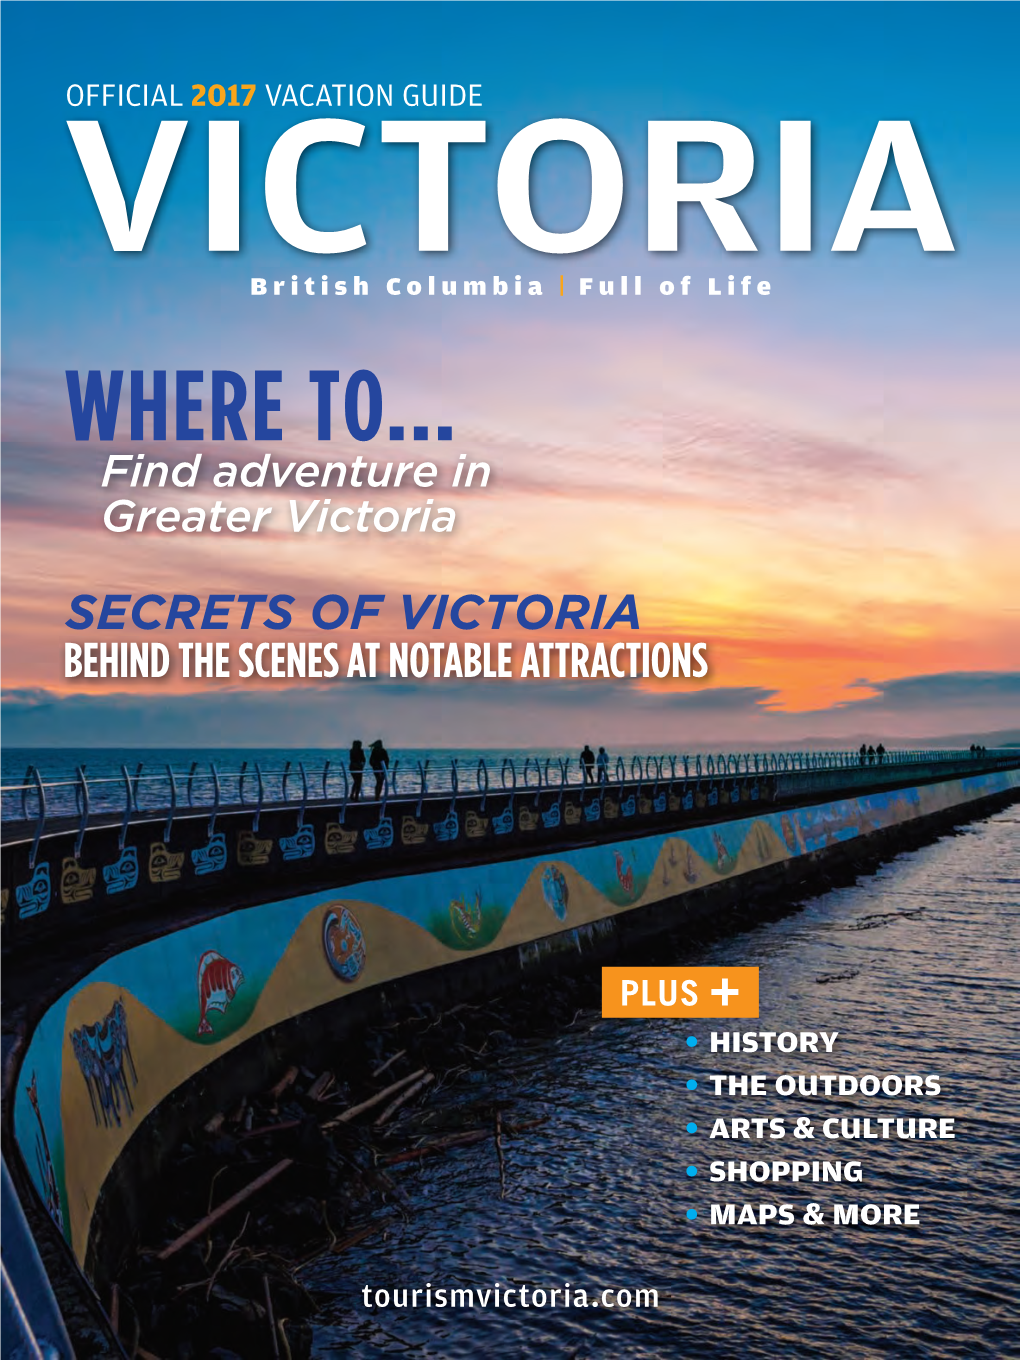 WHERE TO... Find Adventure in Greater Victoria